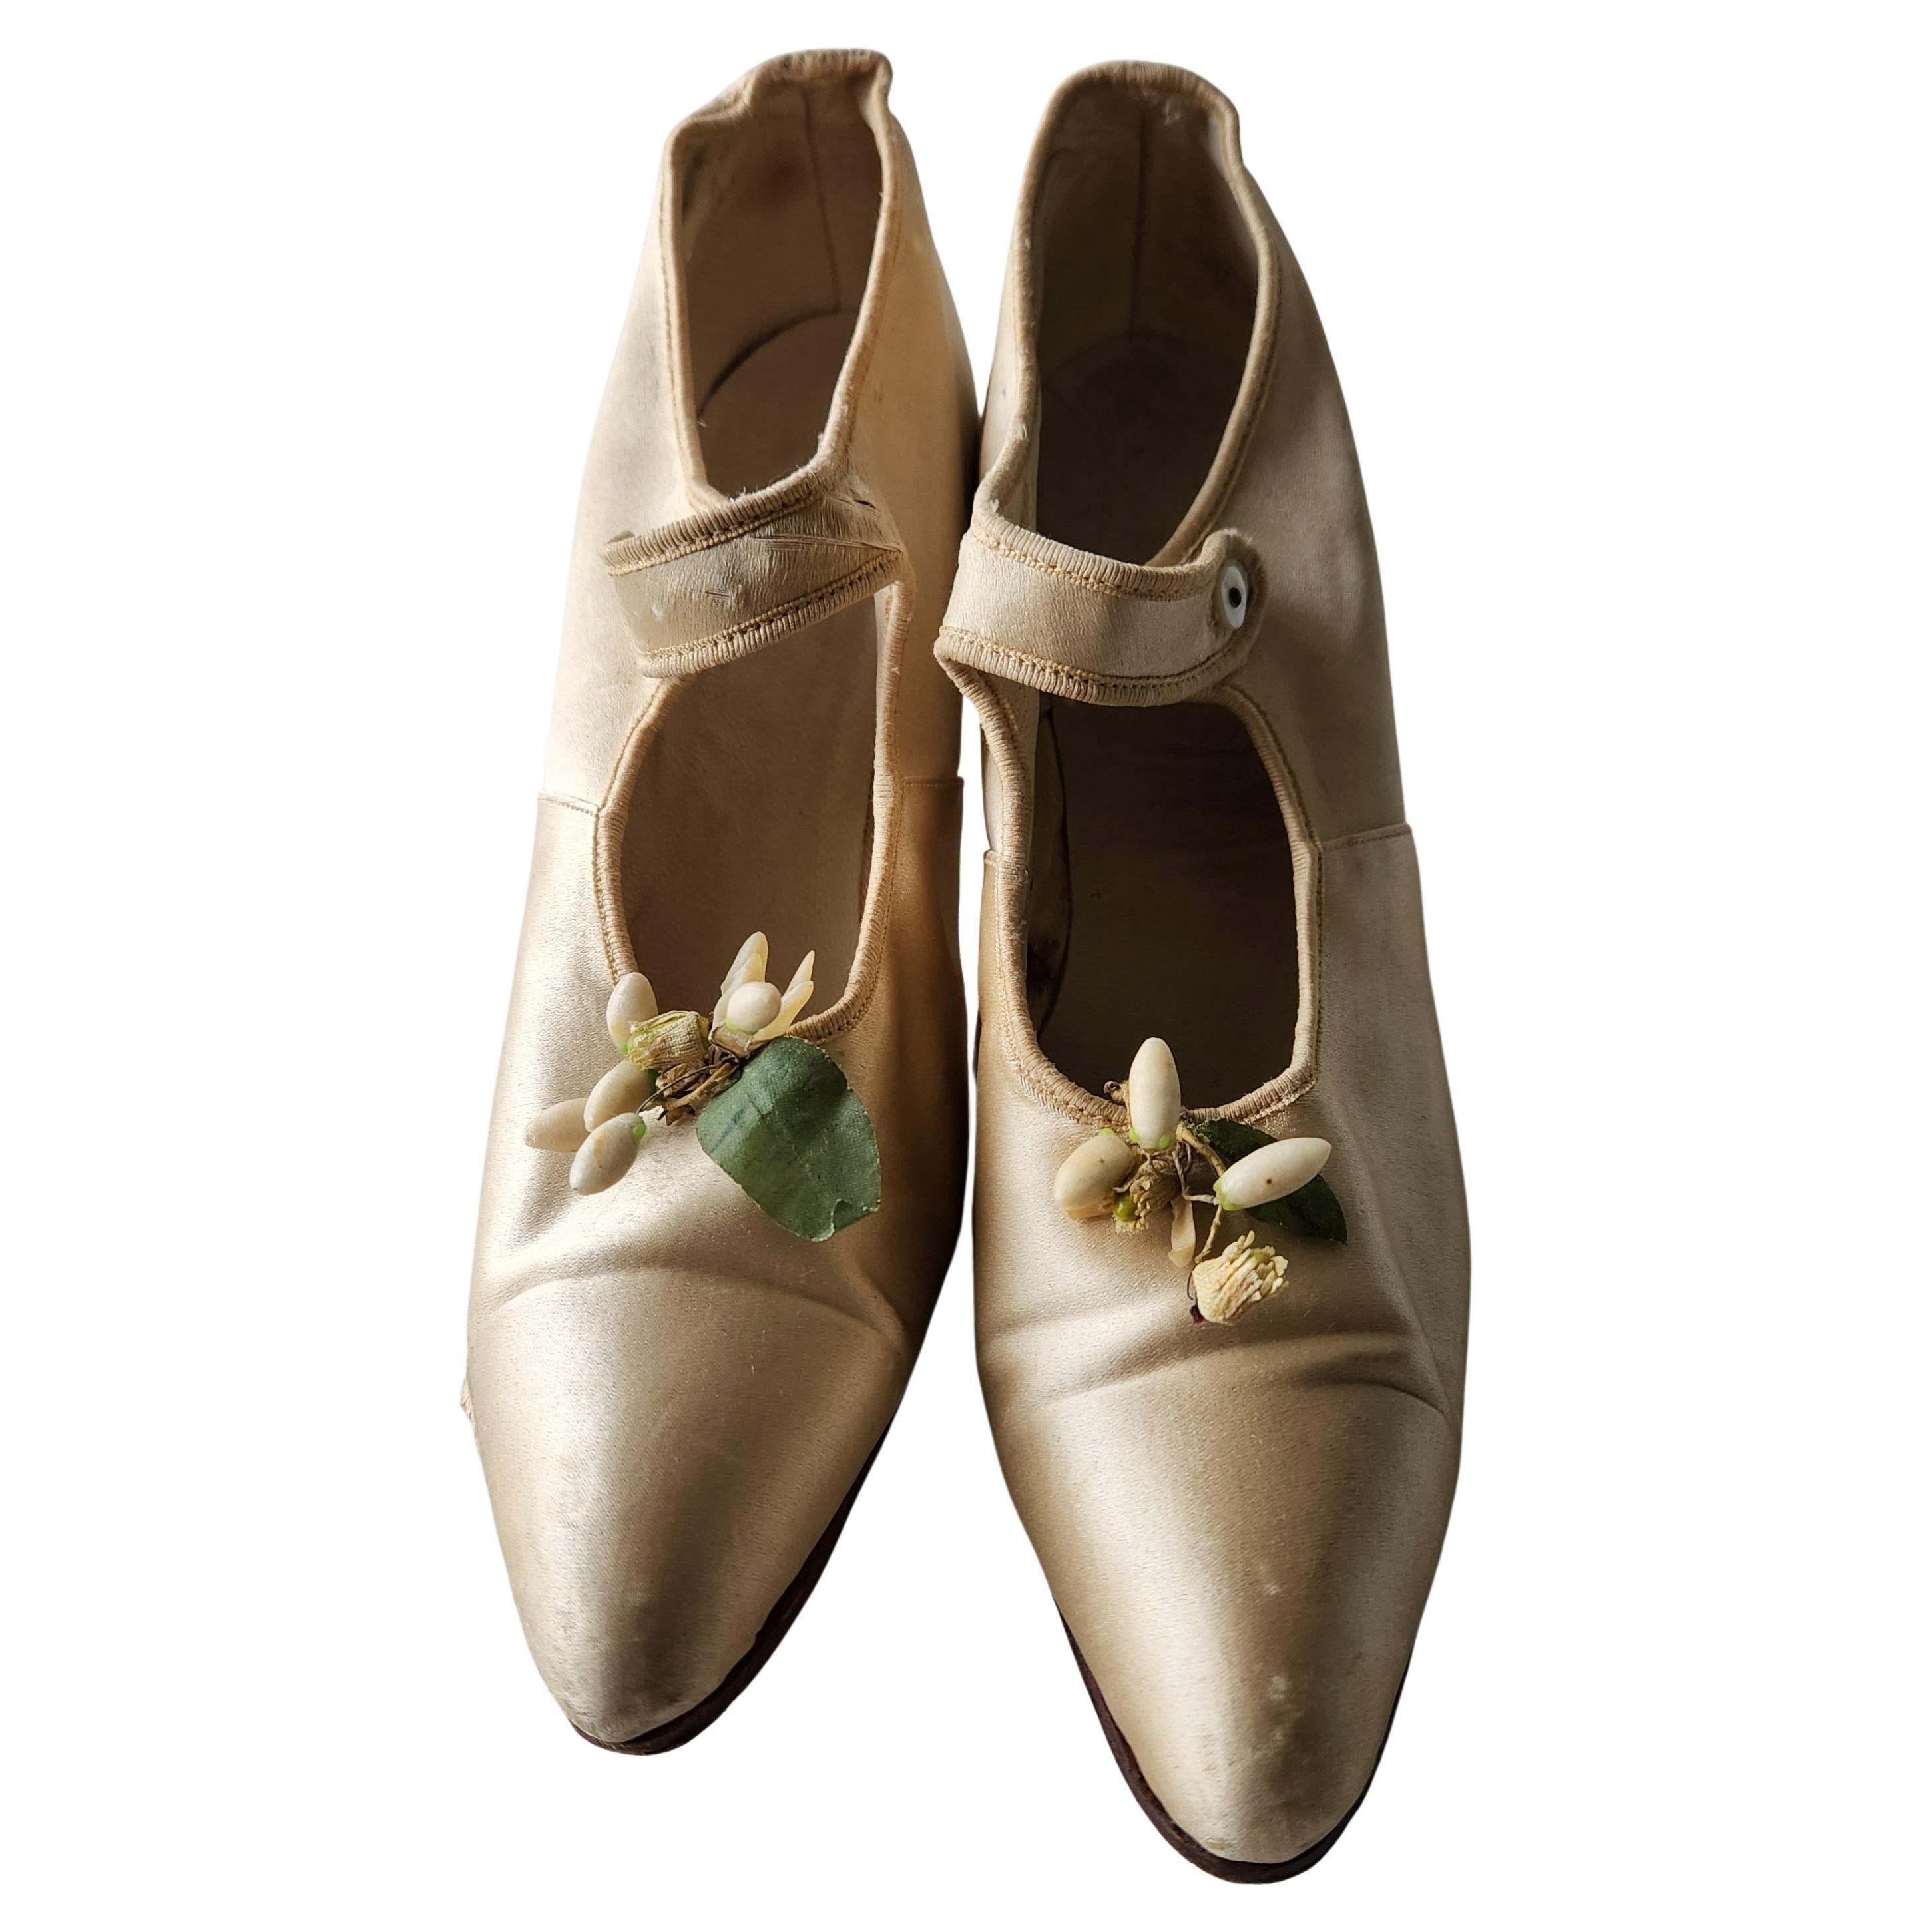 Wedding shoes
Lovely French Victorian cream silk wedding shoes with simple flower bud embellishment.
The bride wore a size 6.
Original vintage treasure in preowned unrestored condition. 
Well preserved with care. Some wear as expected. 
Please refer